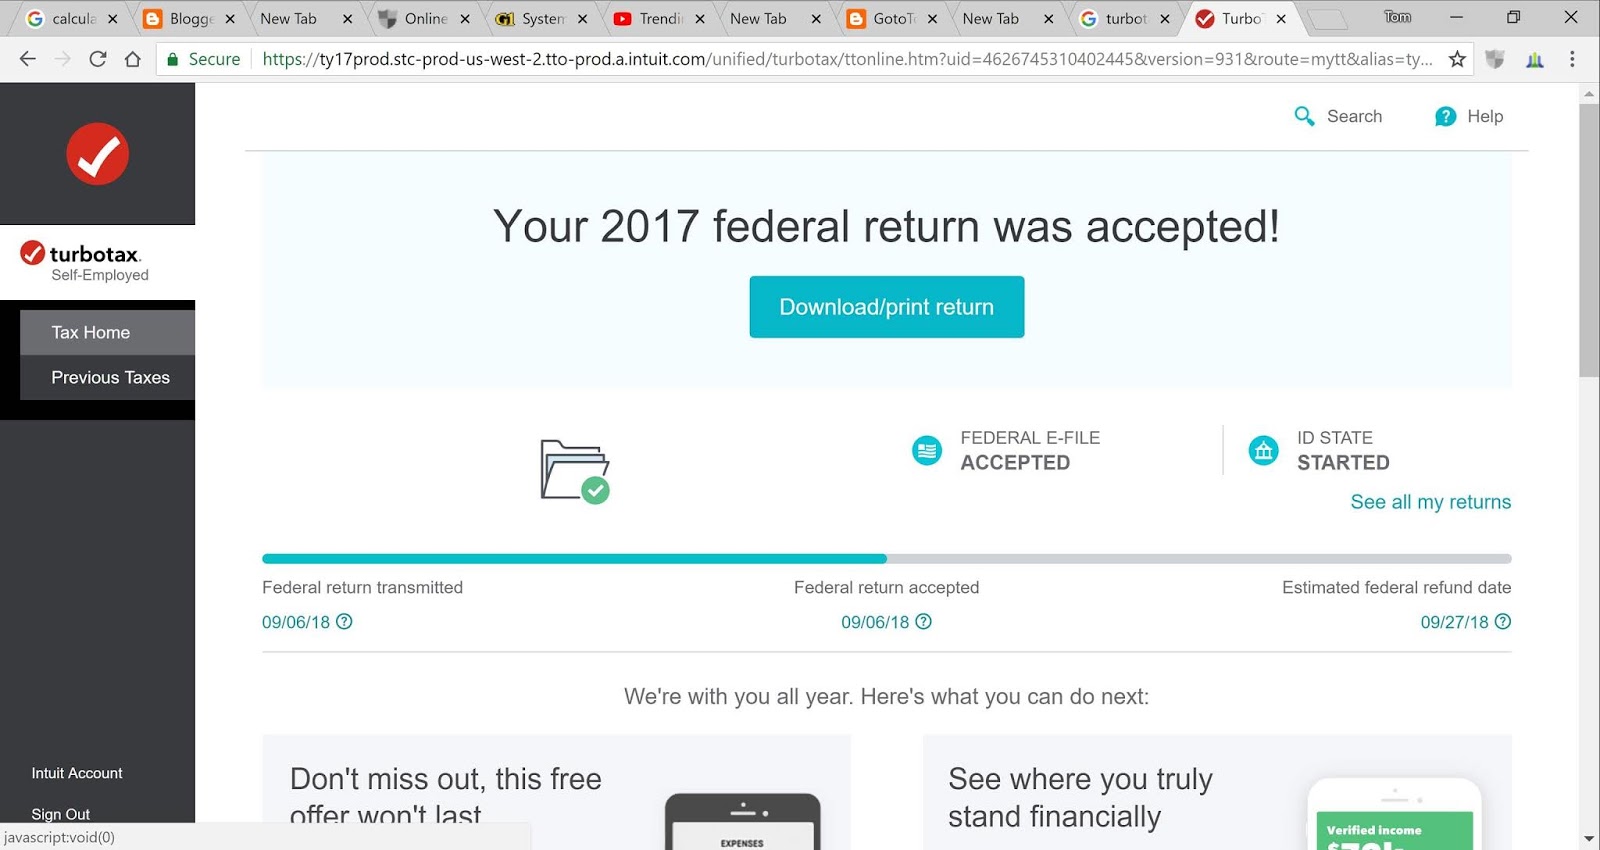 turbotax-reviews-i-had-some-problems-and-turbotax-fixed-them-i-am